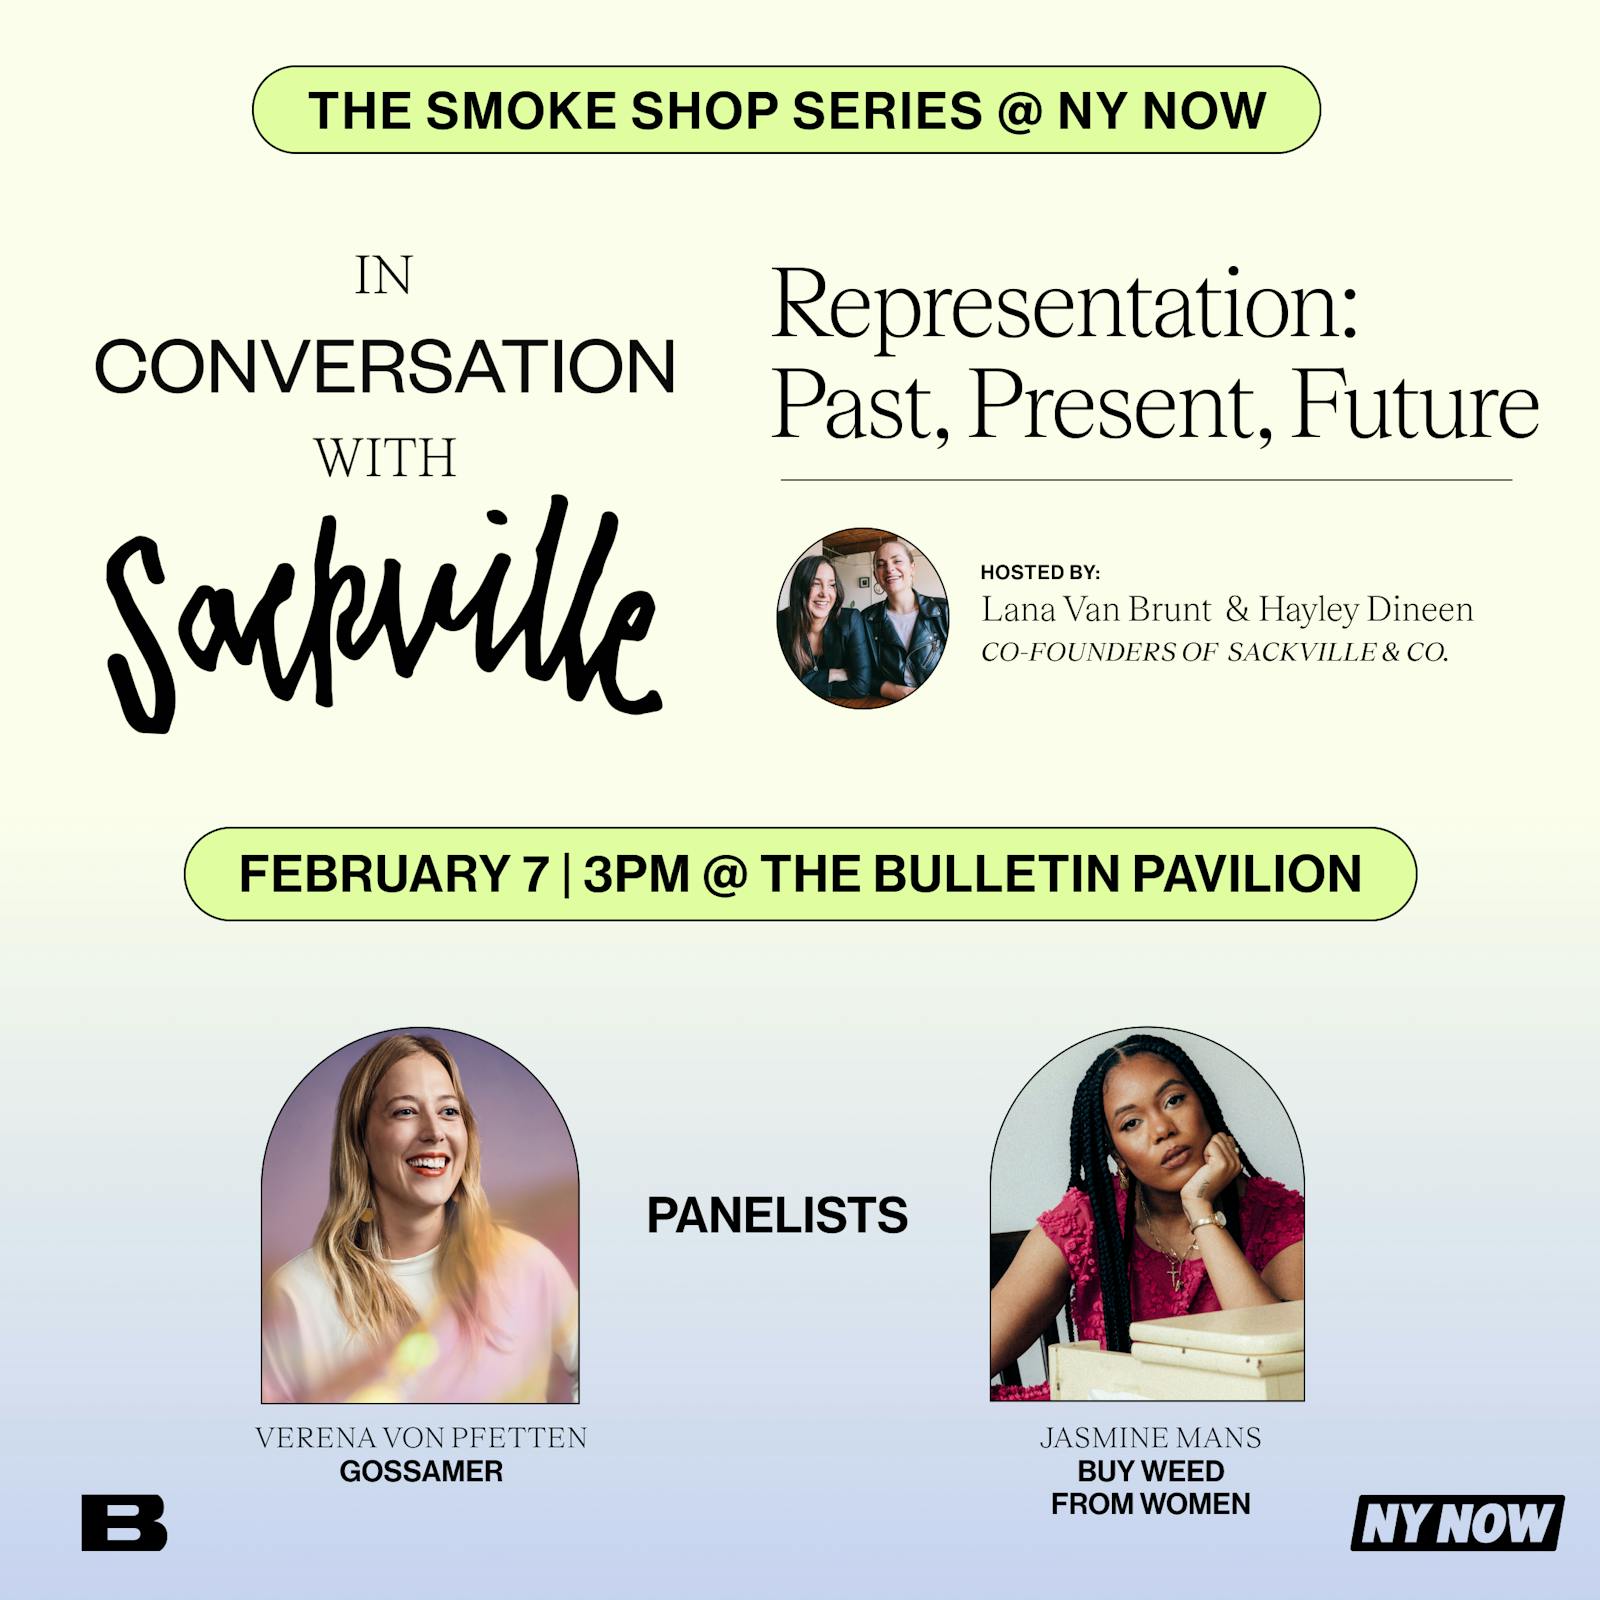 "Representation: Past, Present, and Future" with Verena von Pfetten (Gossamer) + Jasmine Mans (Buy Weed From Women) – The Smoke Shop Series @ NY NOW